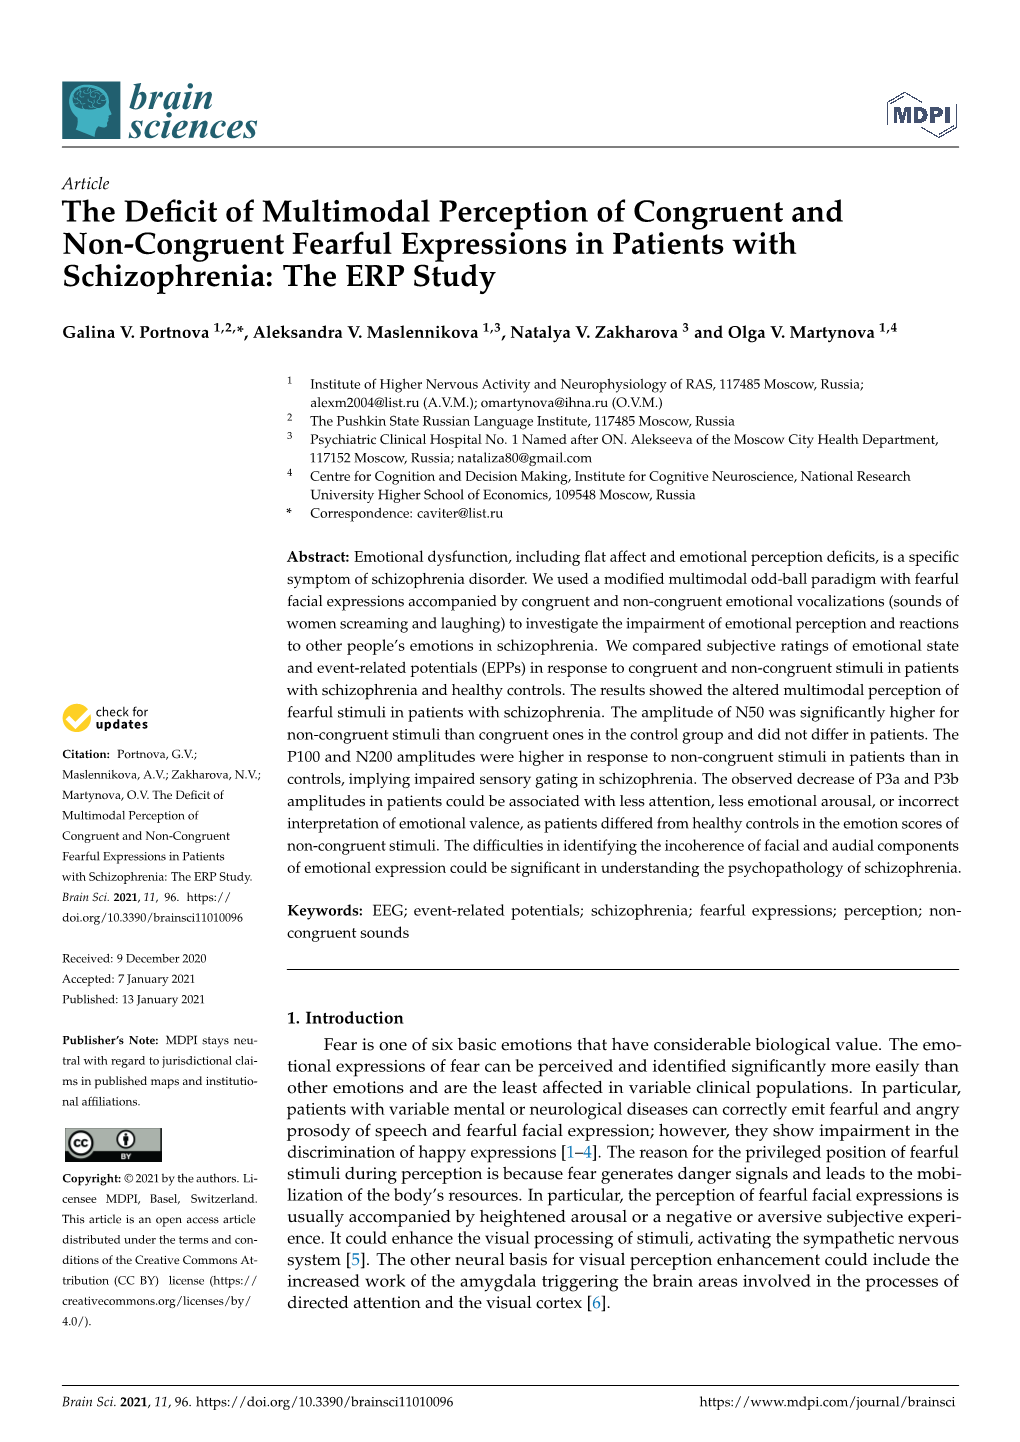 The Deﬁcit of Multimodal Perception of Congruent and Non-Congruent Fearful Expressions in Patients with Schizophrenia: the ERP Study